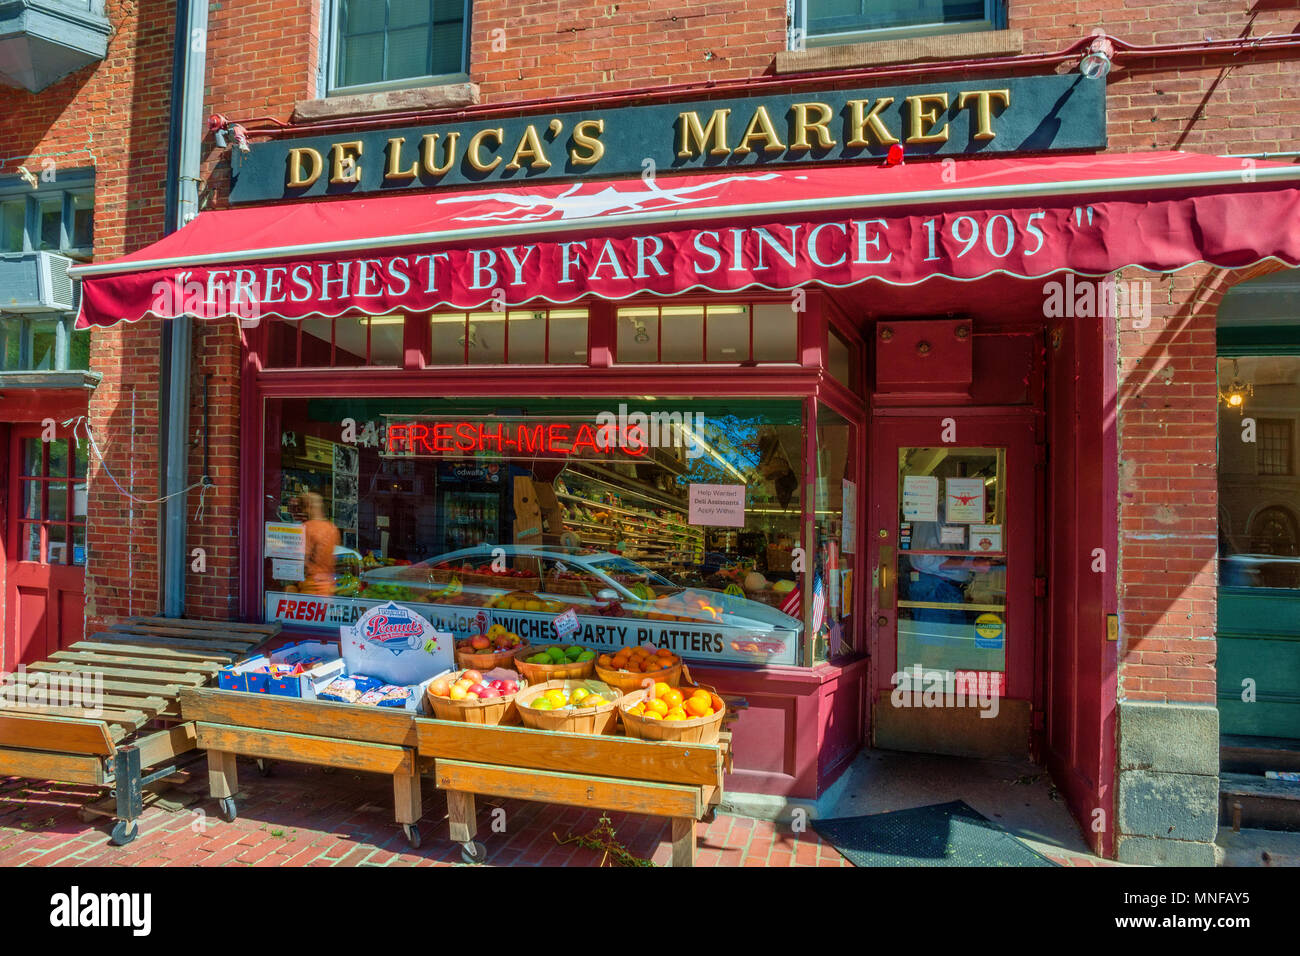 Boston, Massachusetts, USA - September 12, 2016: Beacon Hill's De Luca's Market where one can buy fresh meet, produce and such.  Been in business sinc Stock Photo